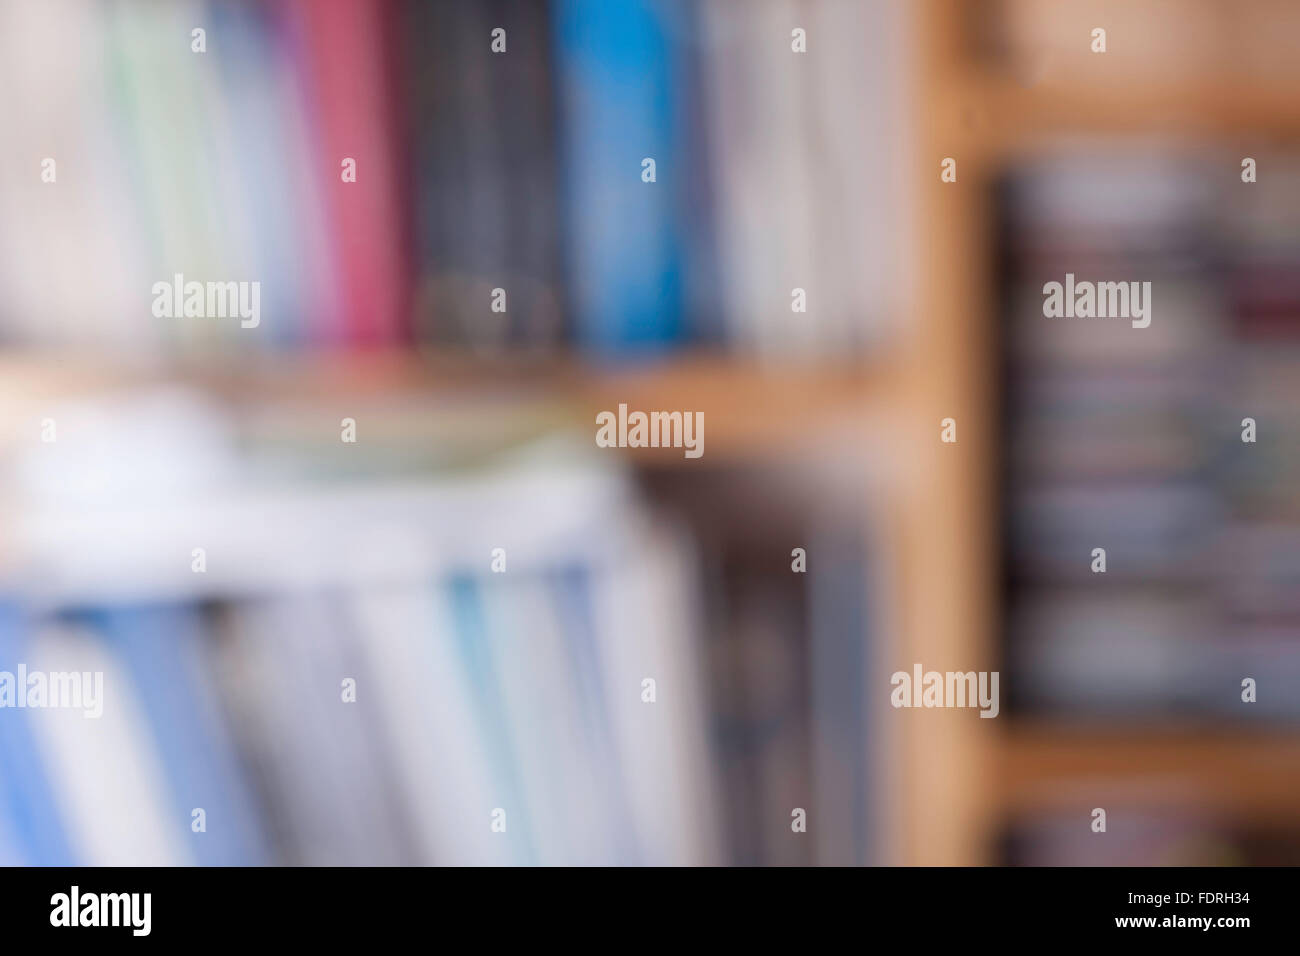 Defocused image of books in a bookstore. Specially blurred photo Stock Photo